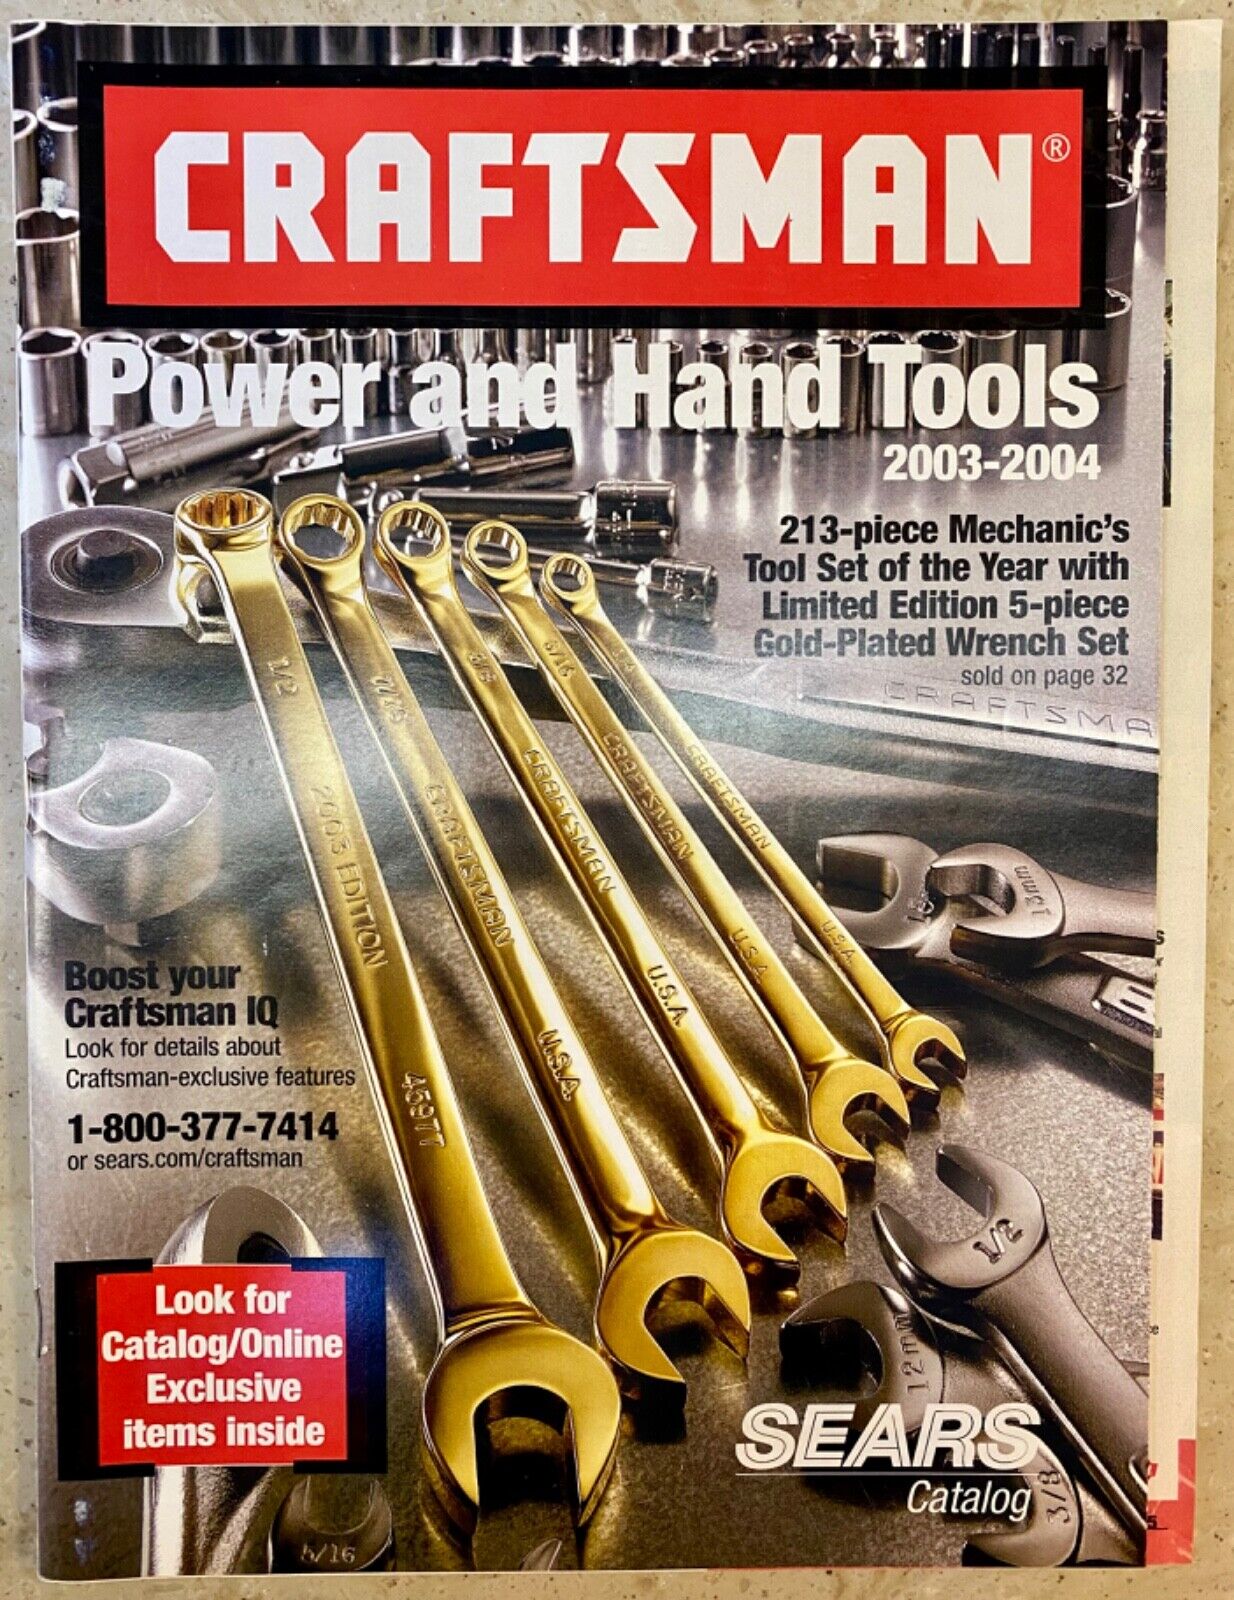 Sears Craftsman 2003-2004 Power and Hand Tools Catalog -NOS-